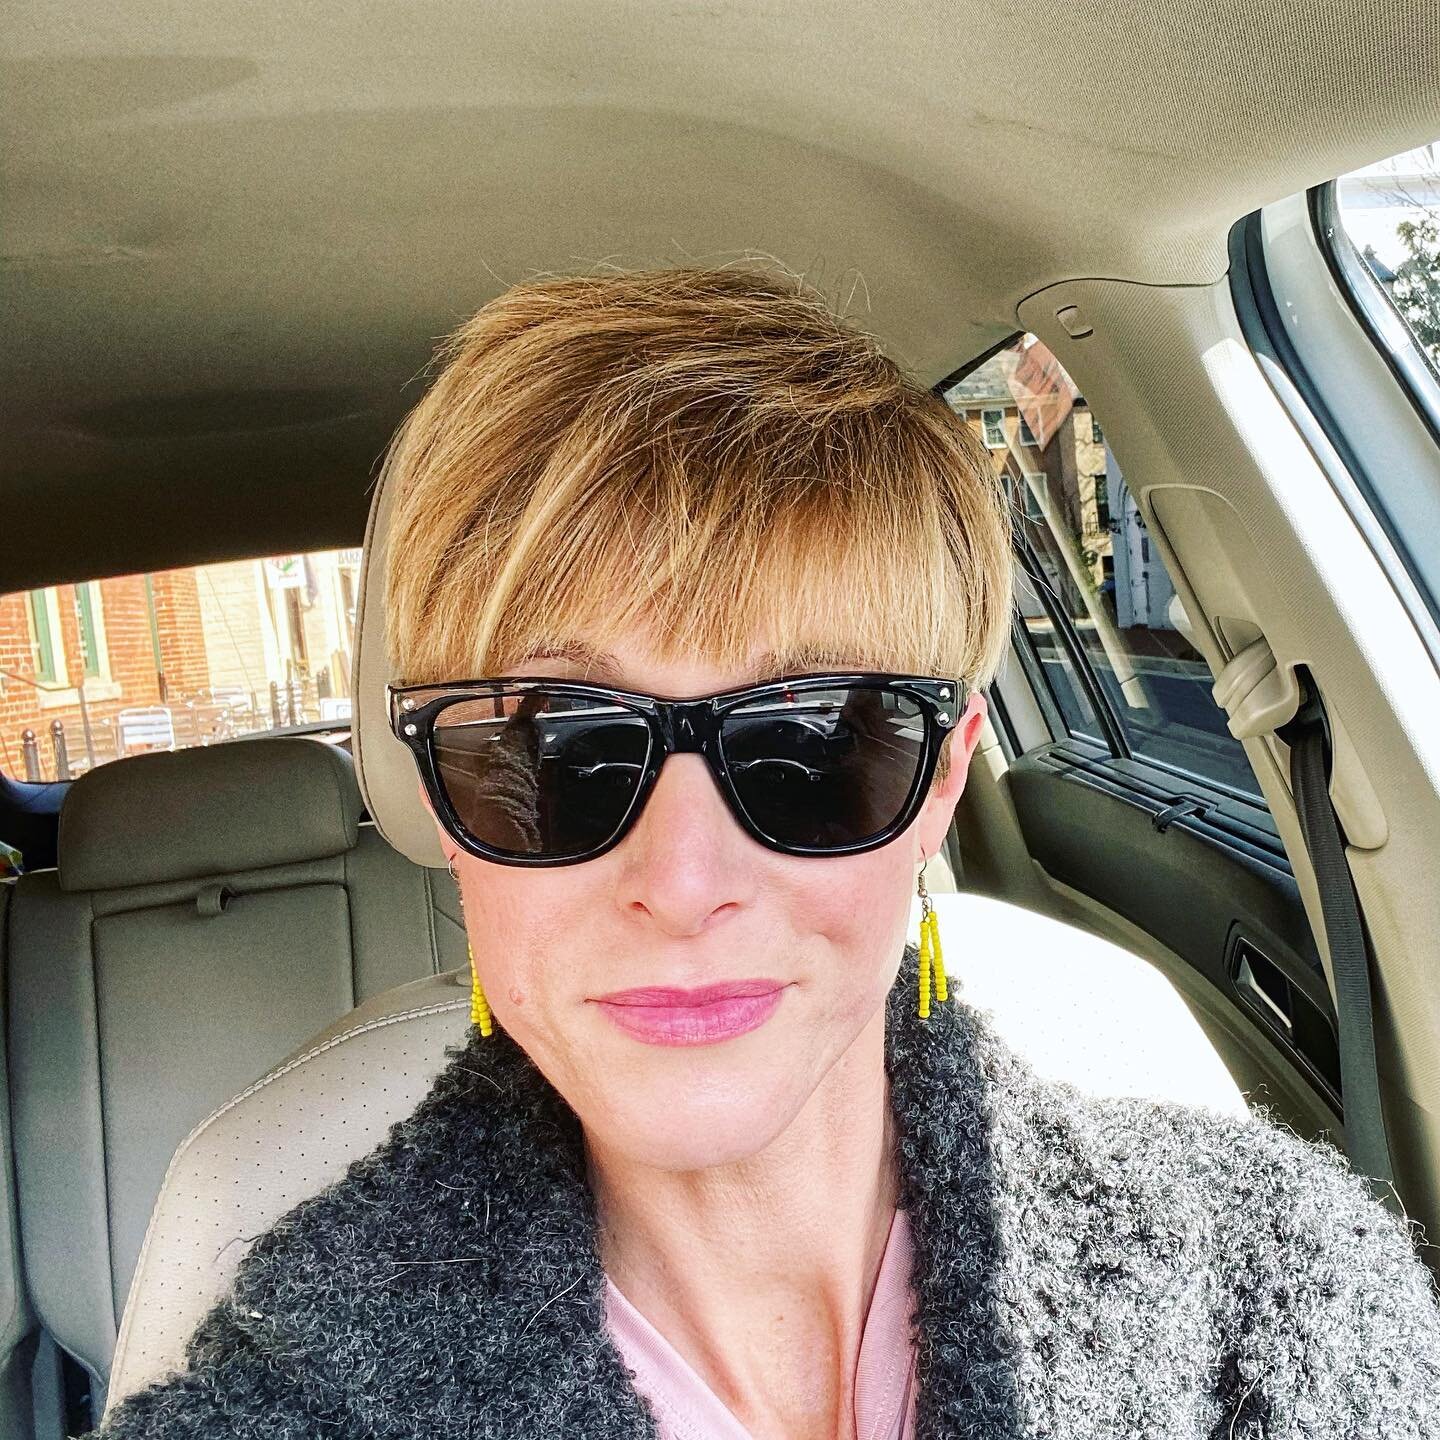 That ℕ𝕖𝕨 ℍ𝕒𝕚𝕣𝕔𝕦𝕥 Flex 💪 

These good vibes brought to you by @stylistsatnorth and the amazing @adoremadore 

#newhaircutwhodis #newhair #channellingwilsonphillips #feelinghot #updatedlook #thanksliz❤️